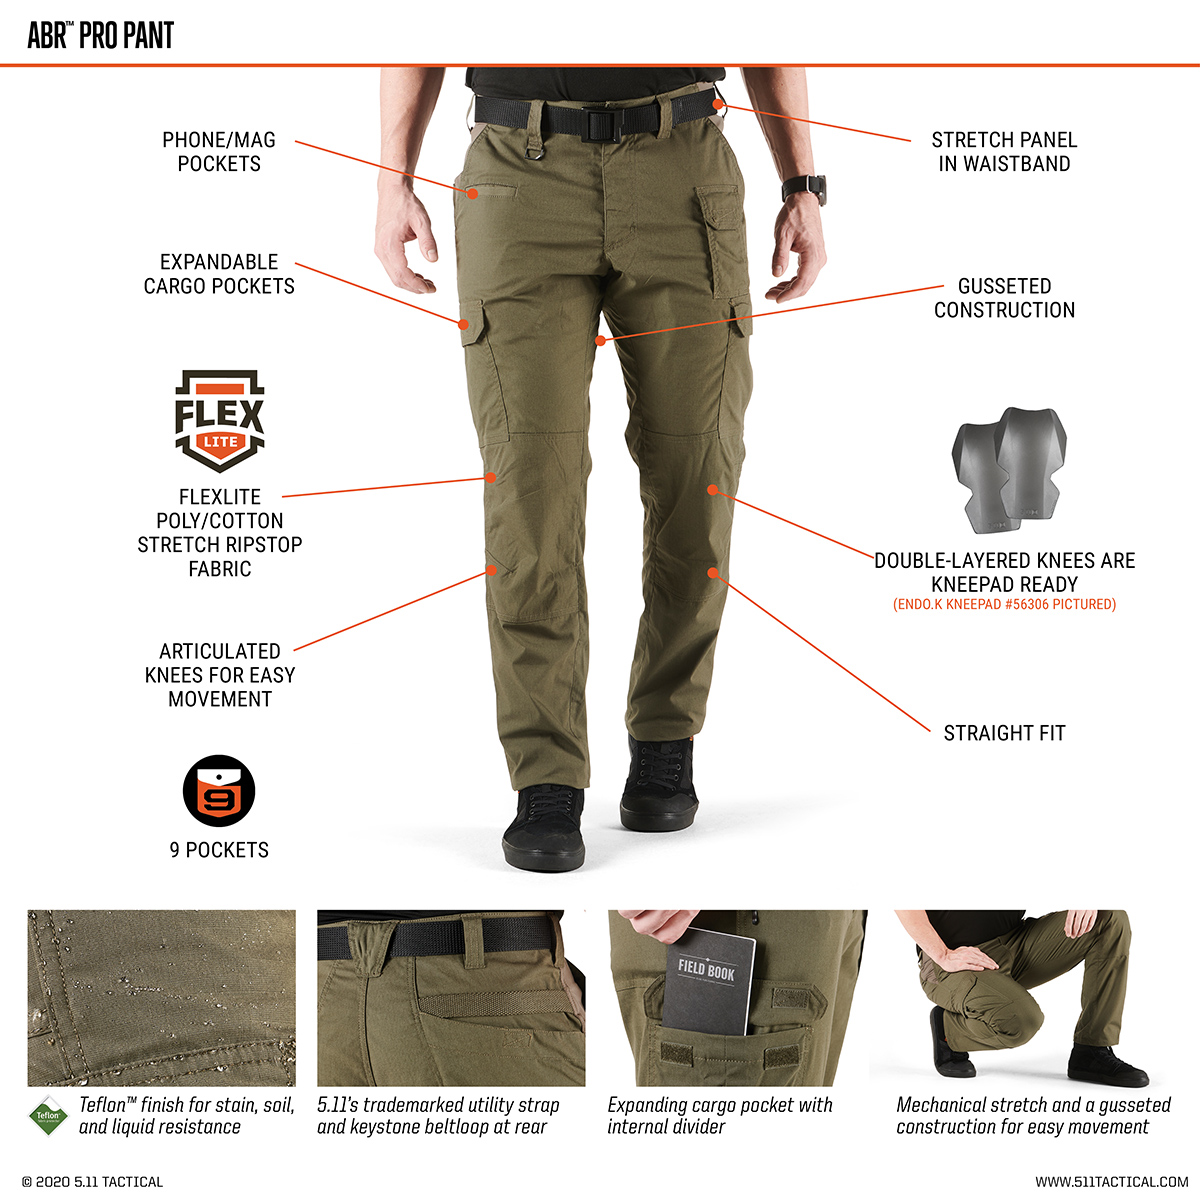 It's here! The new 5.11 ABR Pro tactical pant! - Tactical Solutions NZ